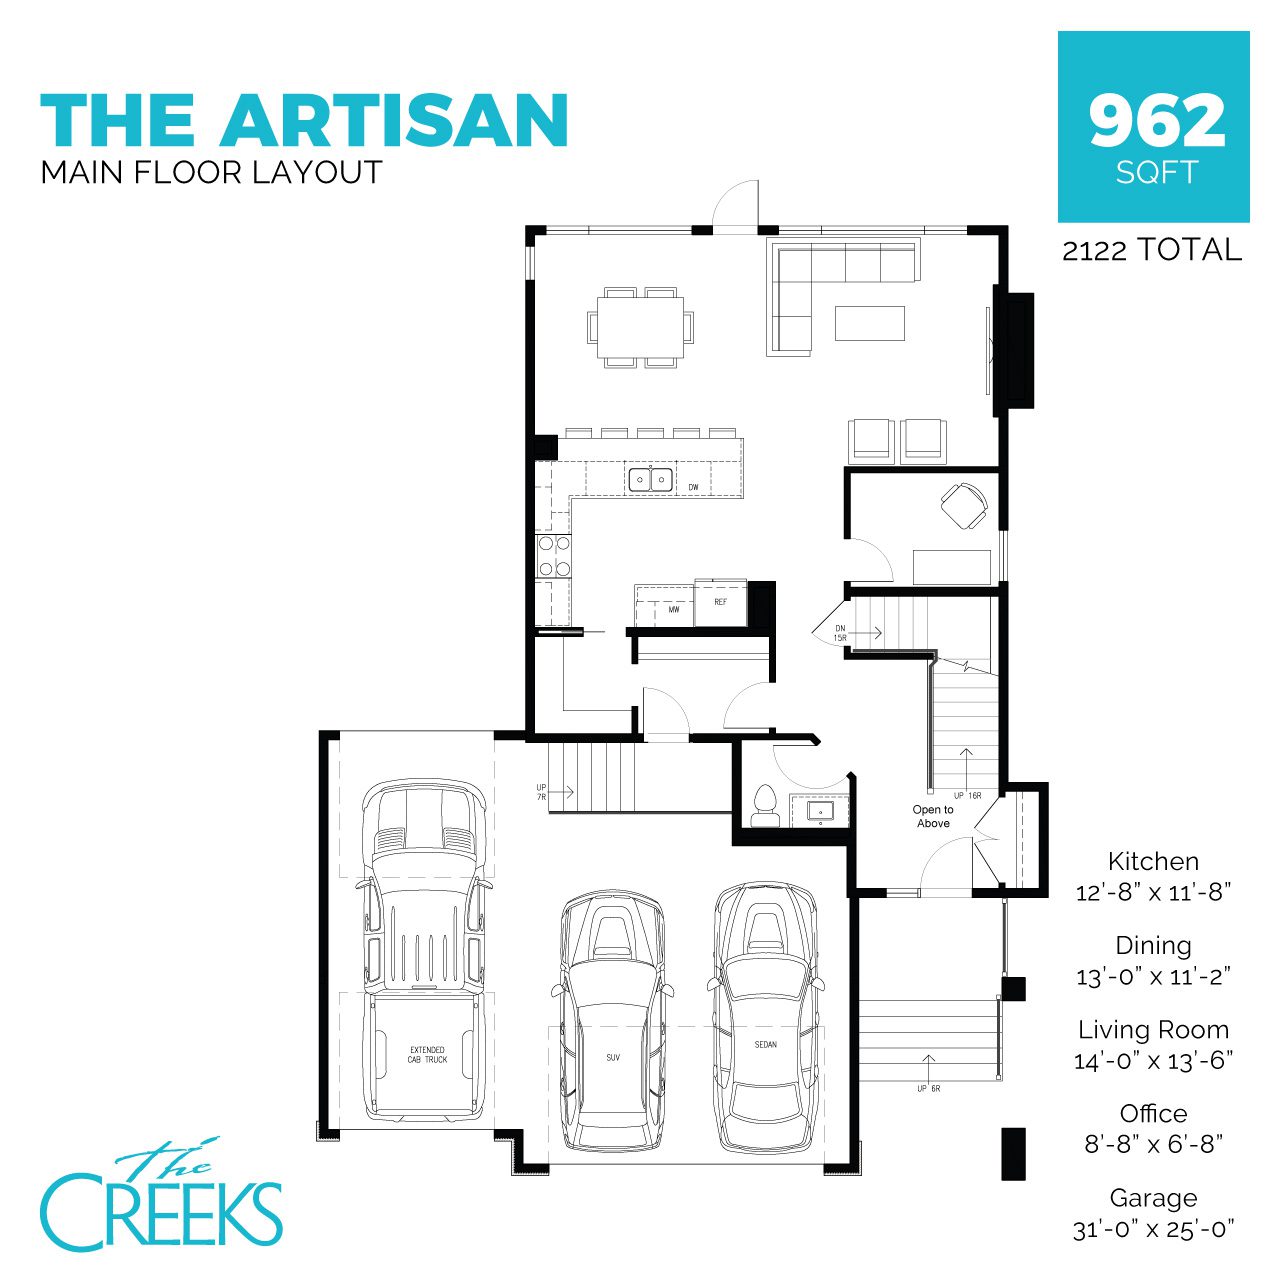 A floor plan for the main level showing an open concept layout with a peninsula kitchen, dining and living room includes and office, pantry, main floor powder room and mudroom with an attached triple-car garage.